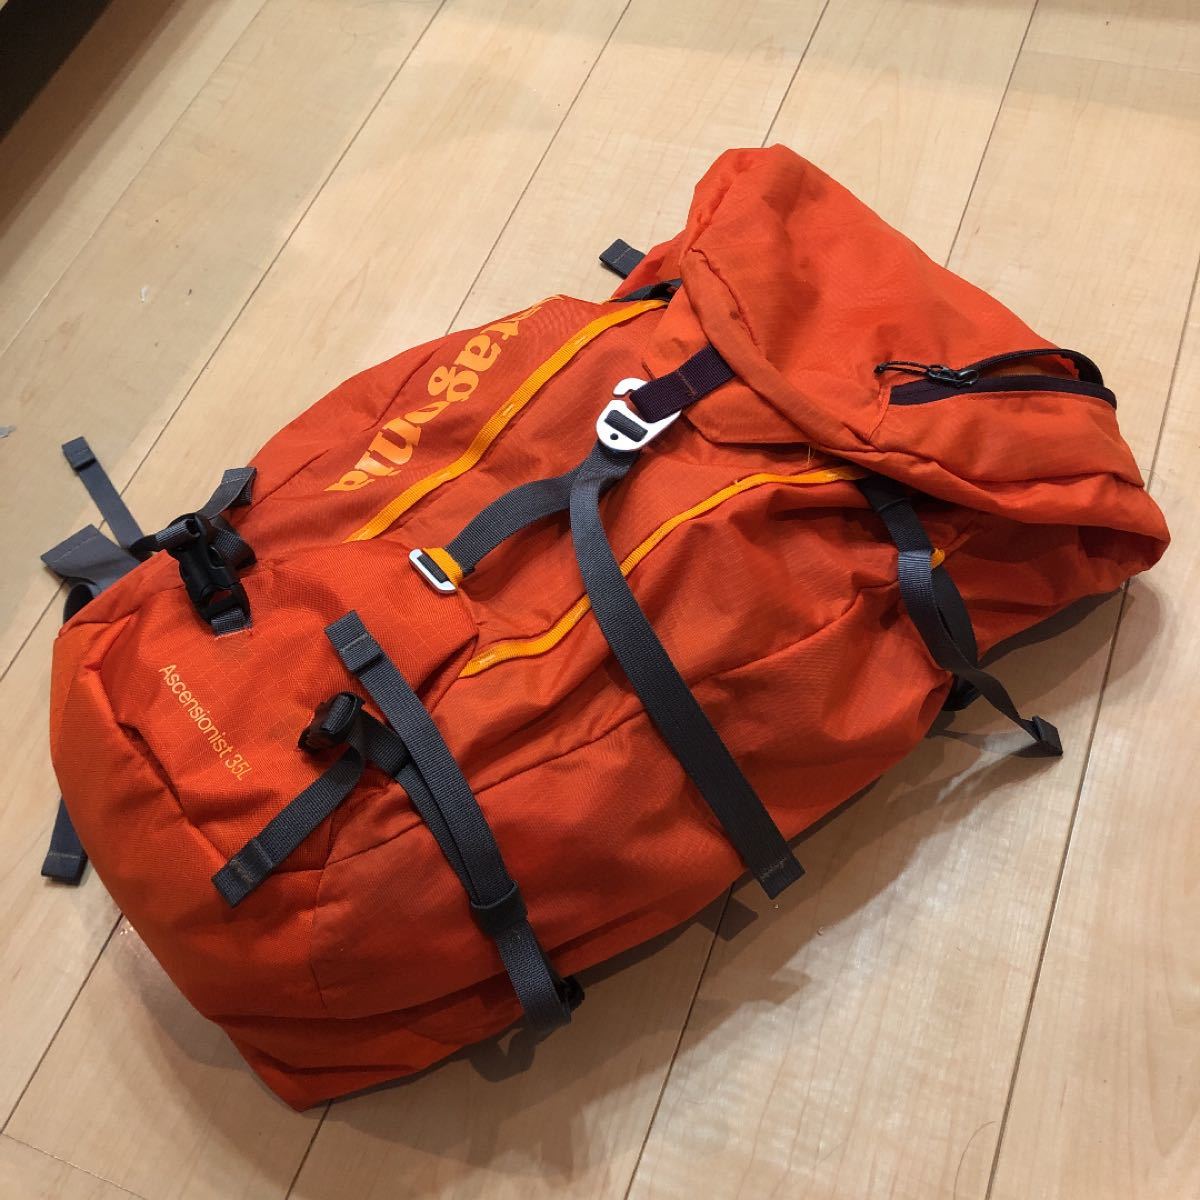 patagonia[パタゴニア]Ascensionist Pack 35L used